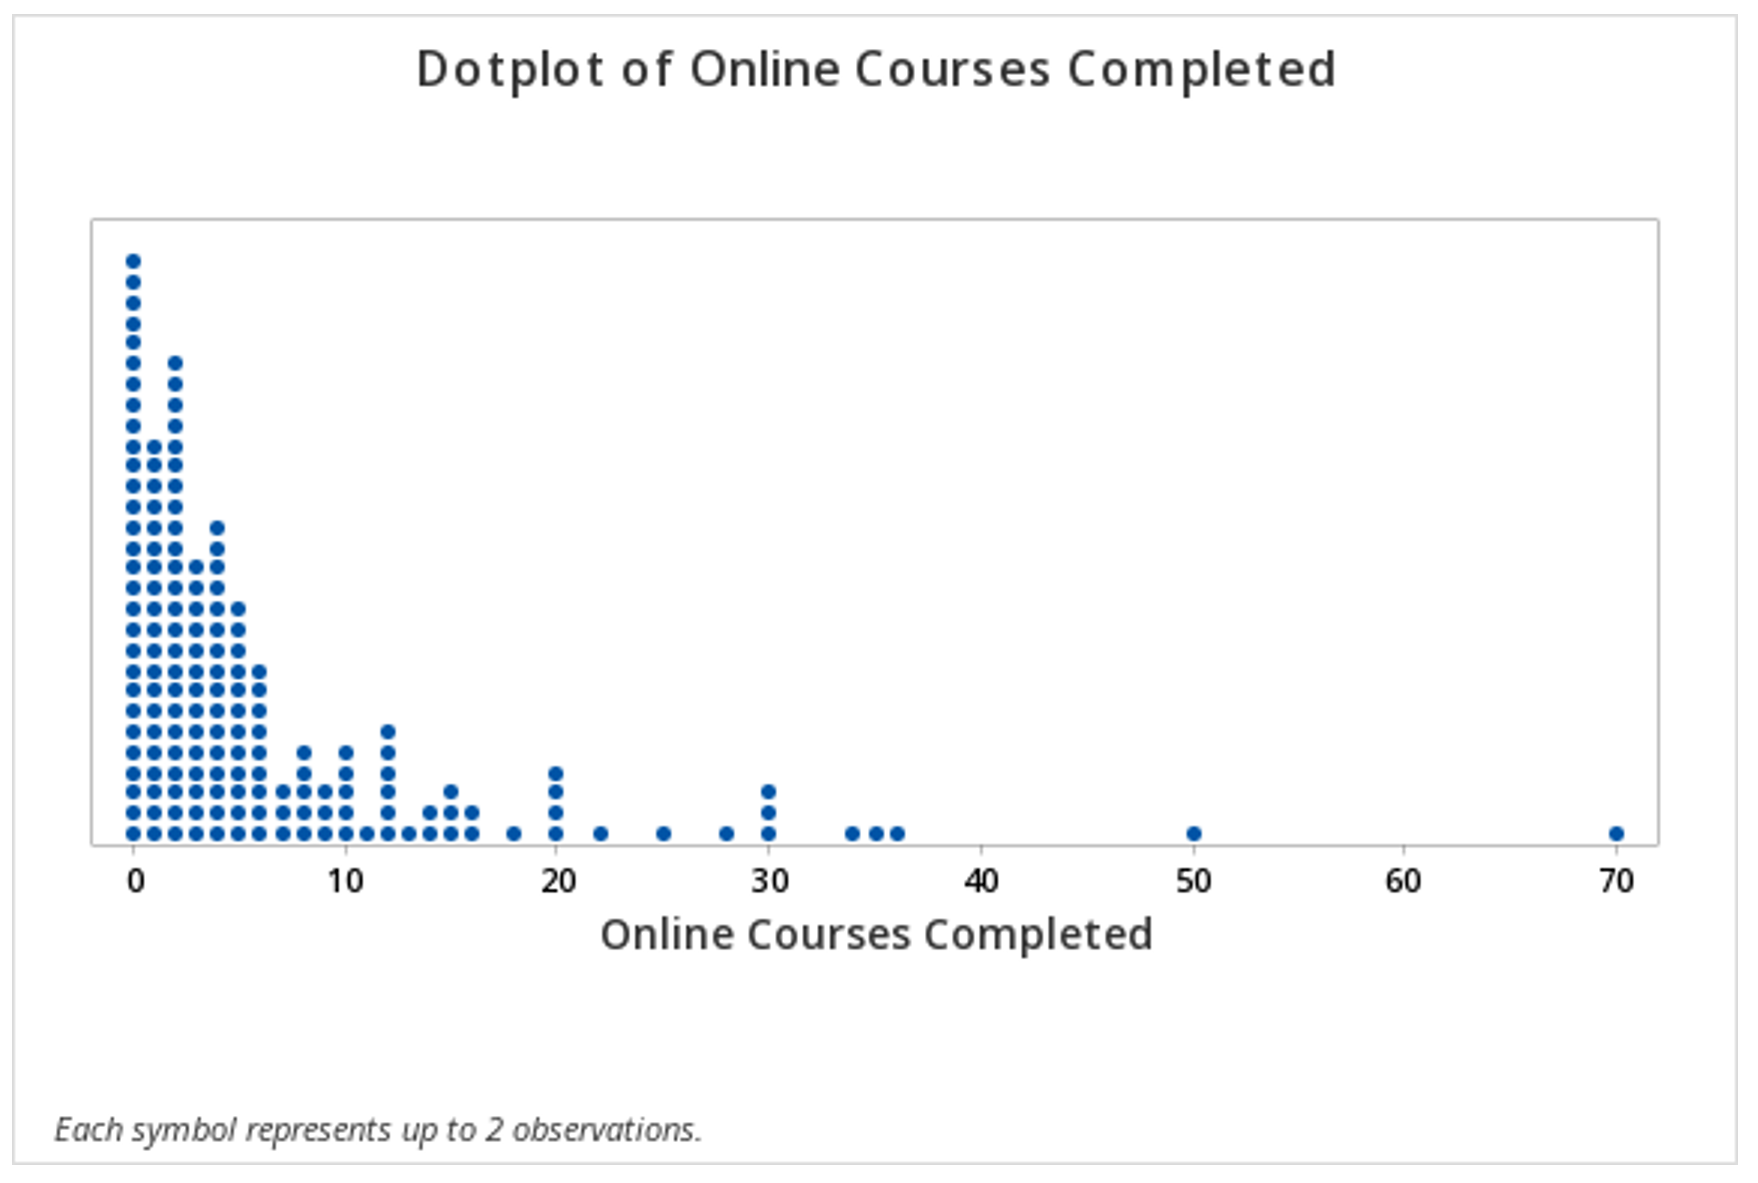 Dotplot of online courses completed